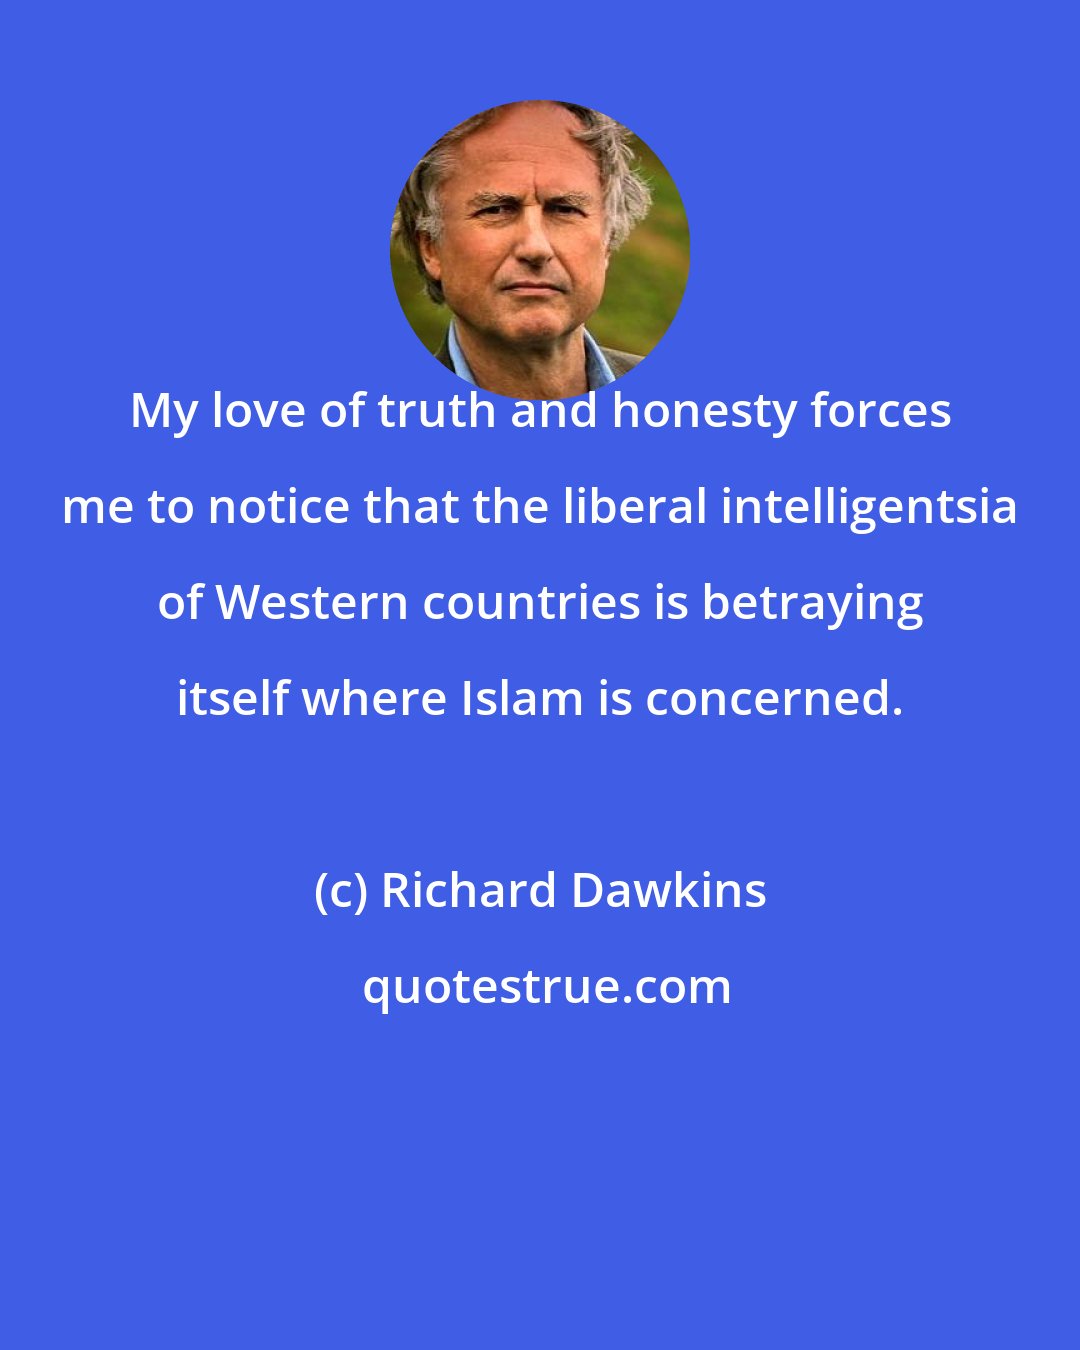 Richard Dawkins: My love of truth and honesty forces me to notice that the liberal intelligentsia of Western countries is betraying itself where Islam is concerned.